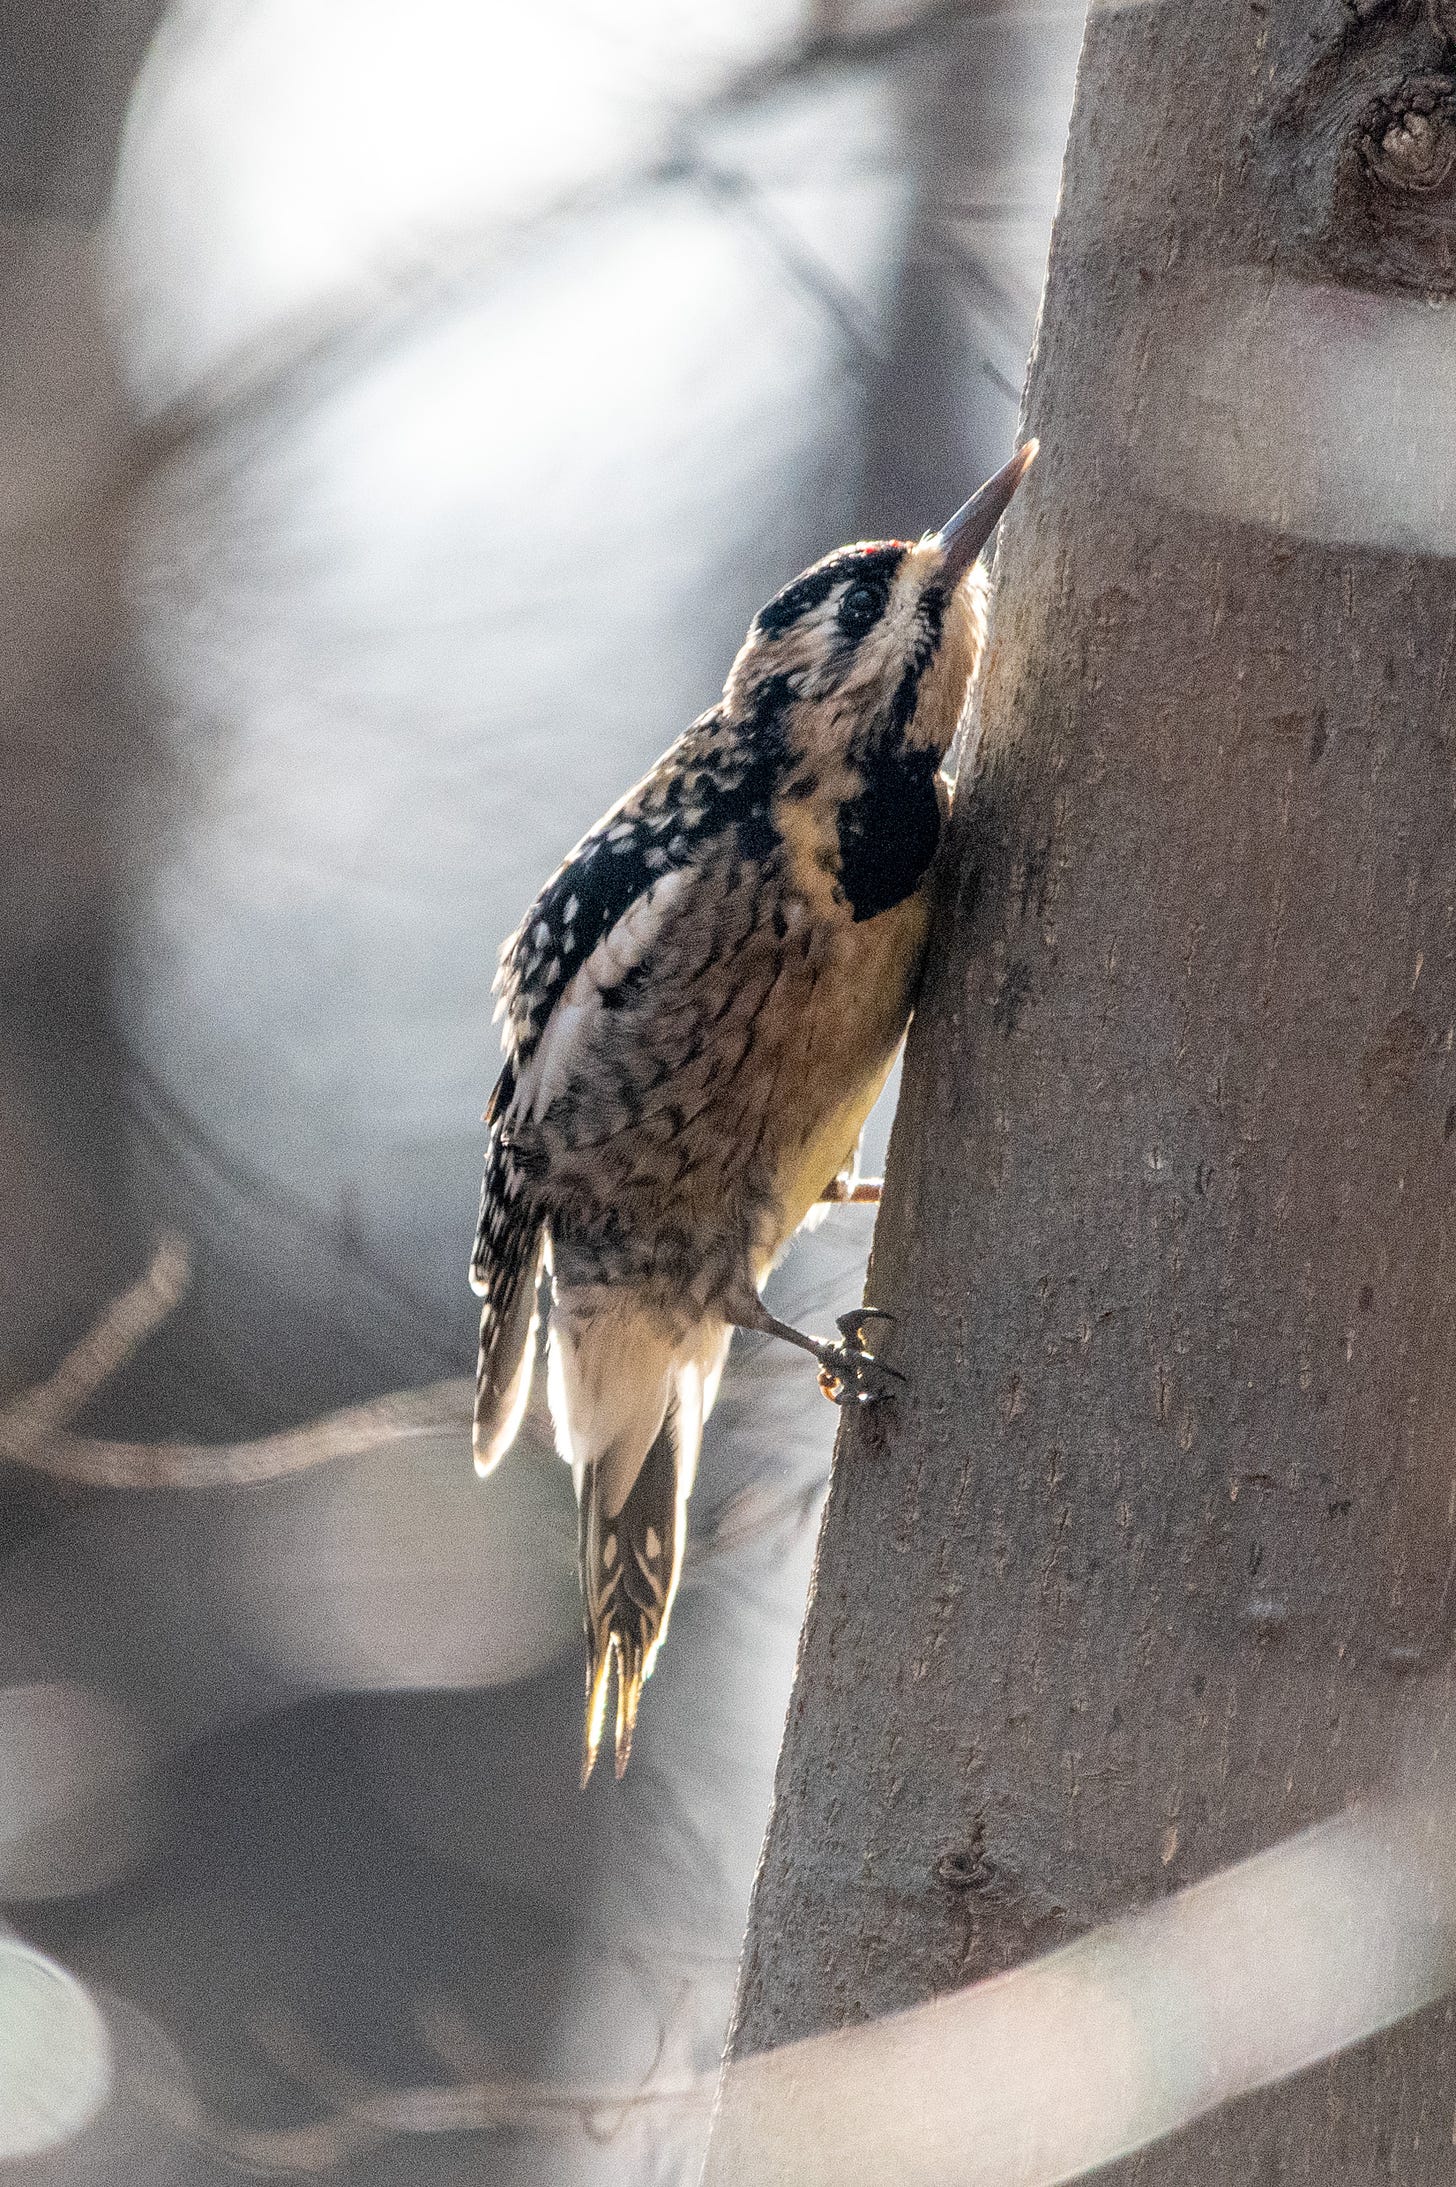 A yellow-bellied sapsucker seen from the side as it crawls up the trunk of a tree, its chin and breast almost flat against the bark